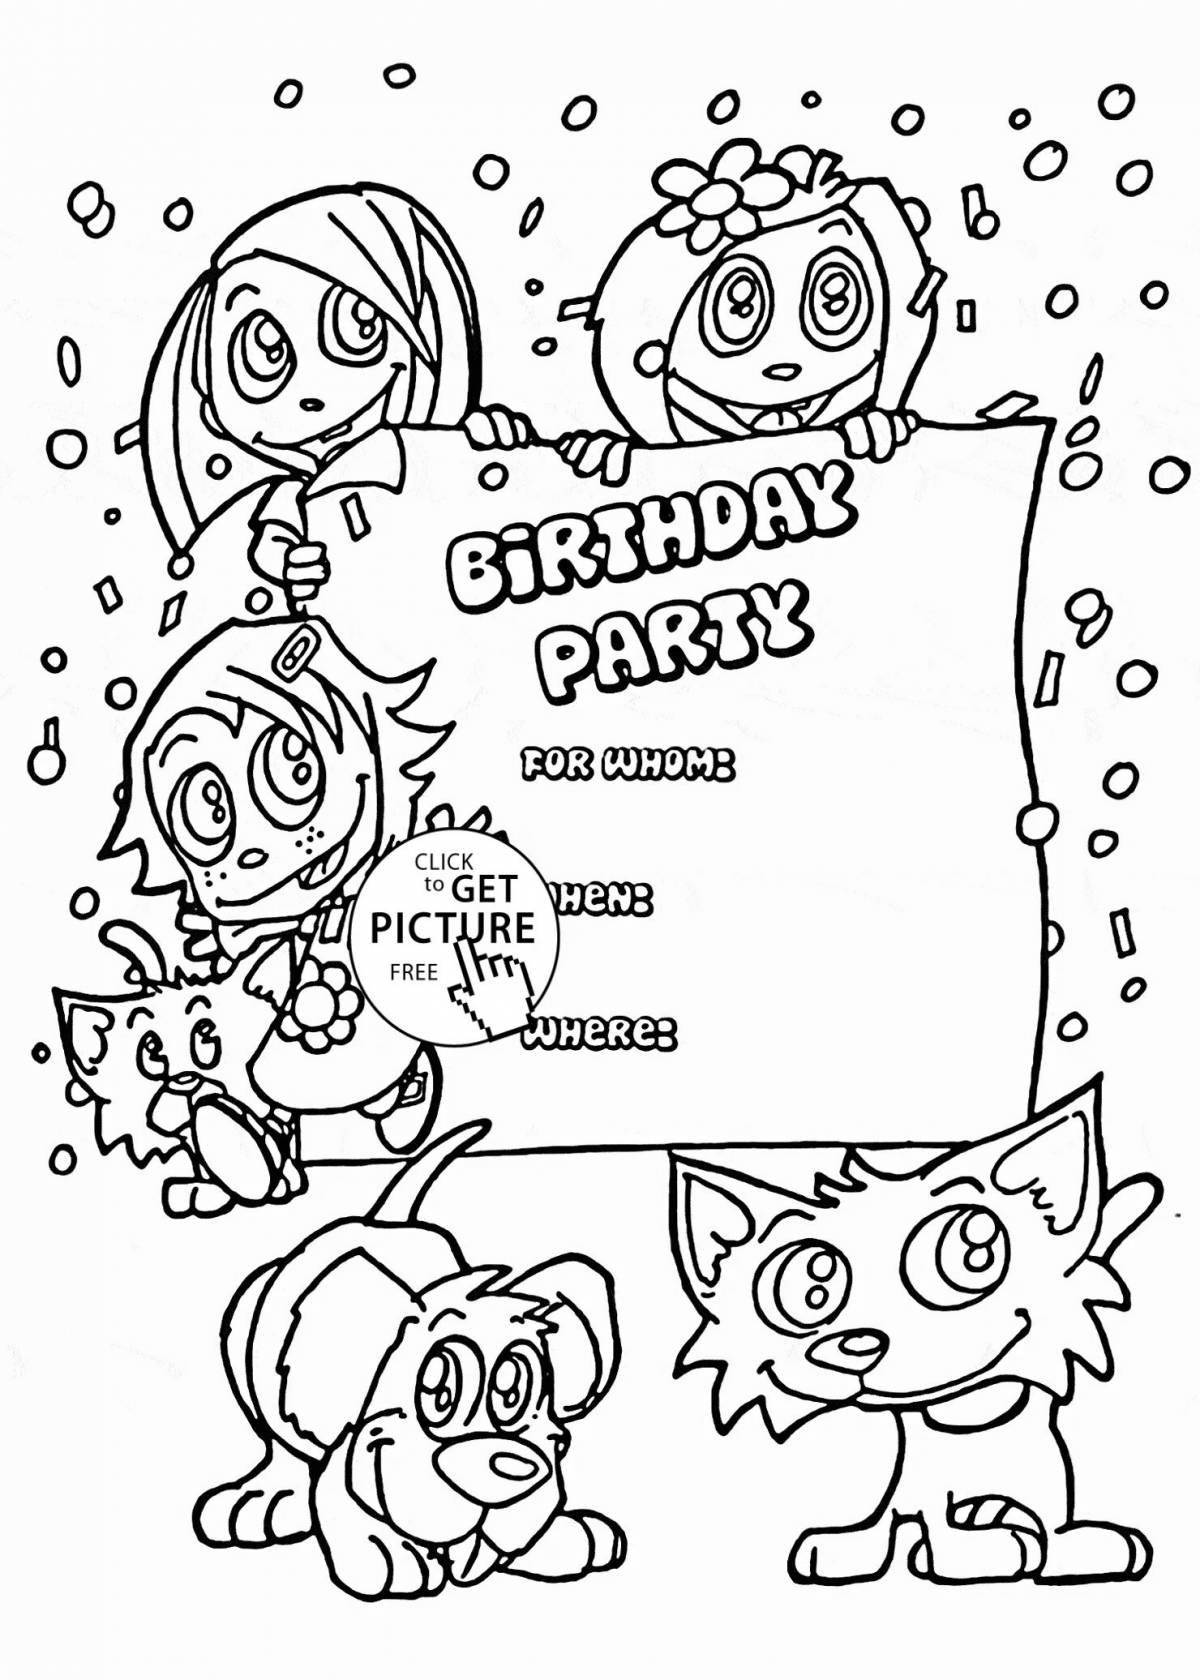 Colouring colorful birthday invitation for girls